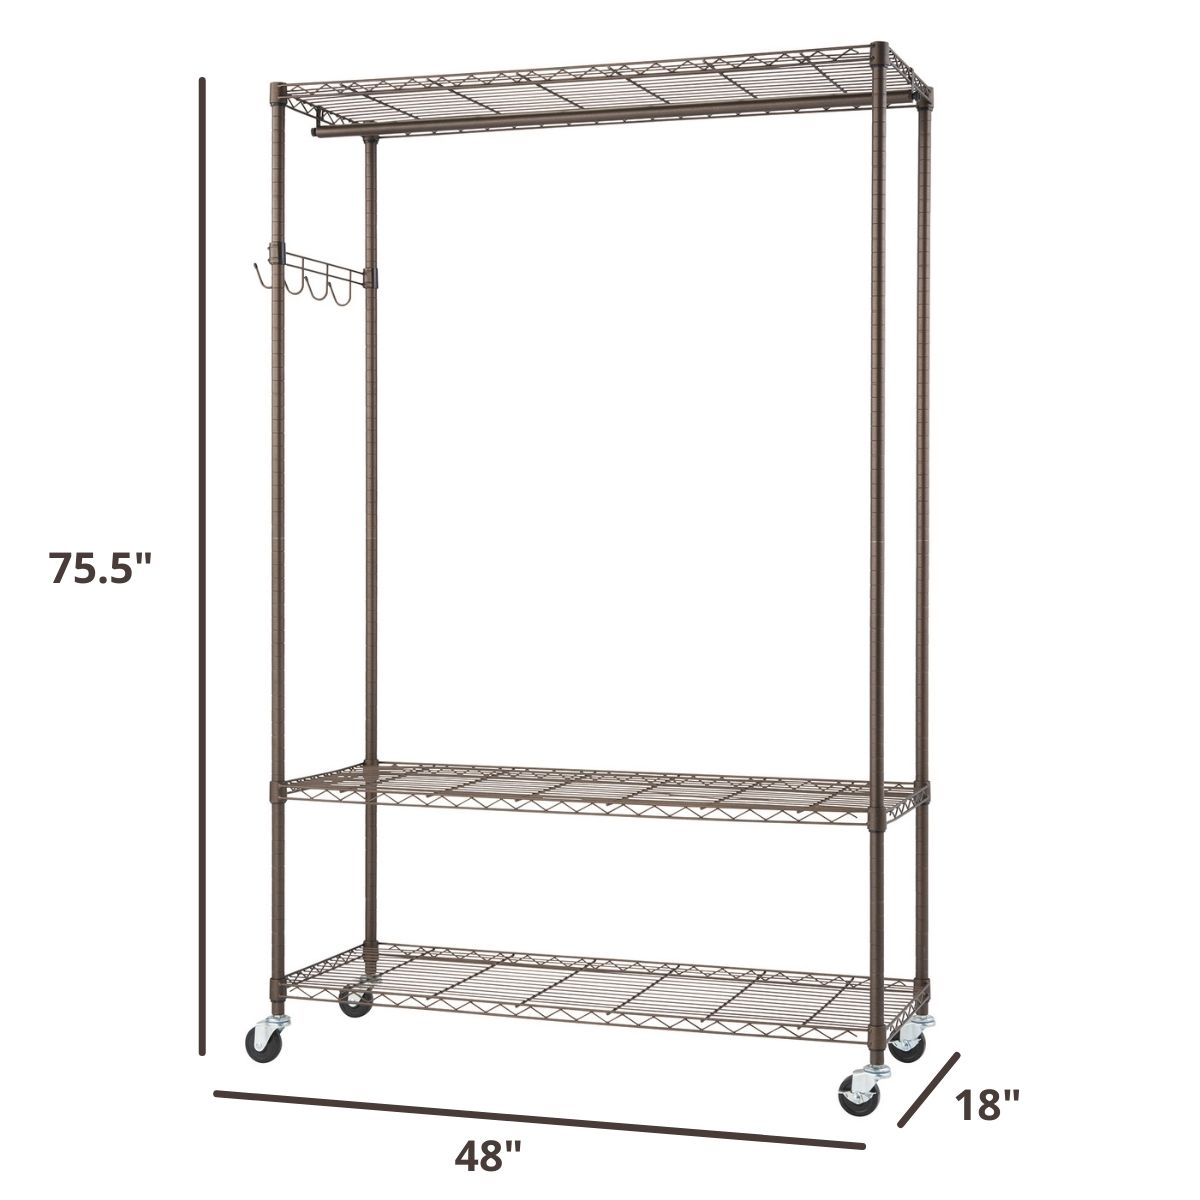 48 inches wide by 18 inches deep by 75.5 inches tall garment rack